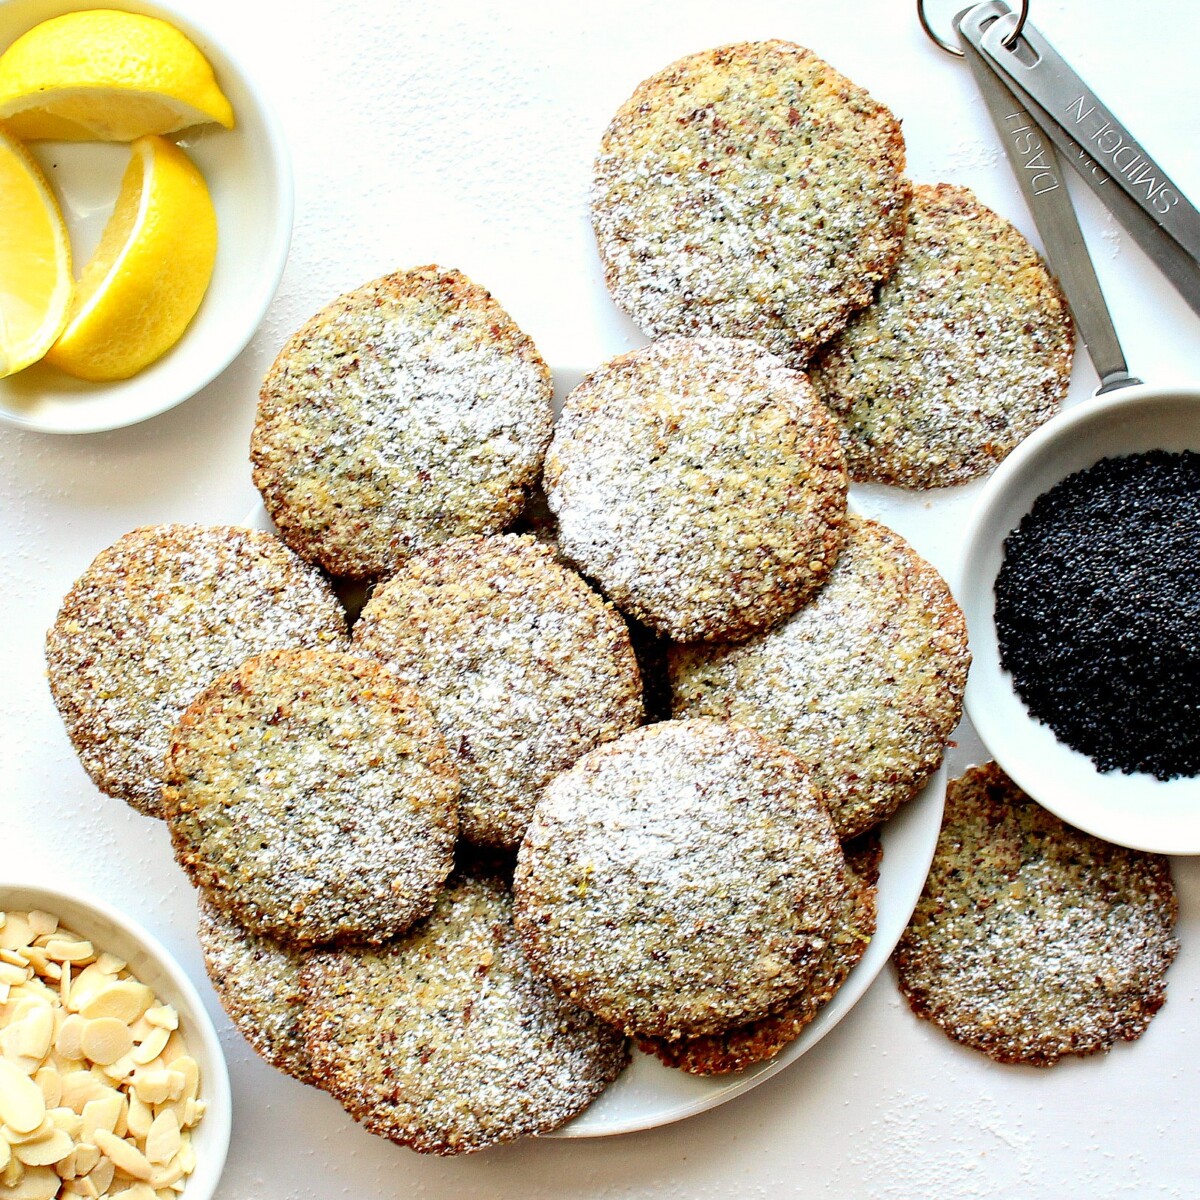  Cookies on a serving plate with bowls of poppy seeds, slivered almonds, and lemon slices.